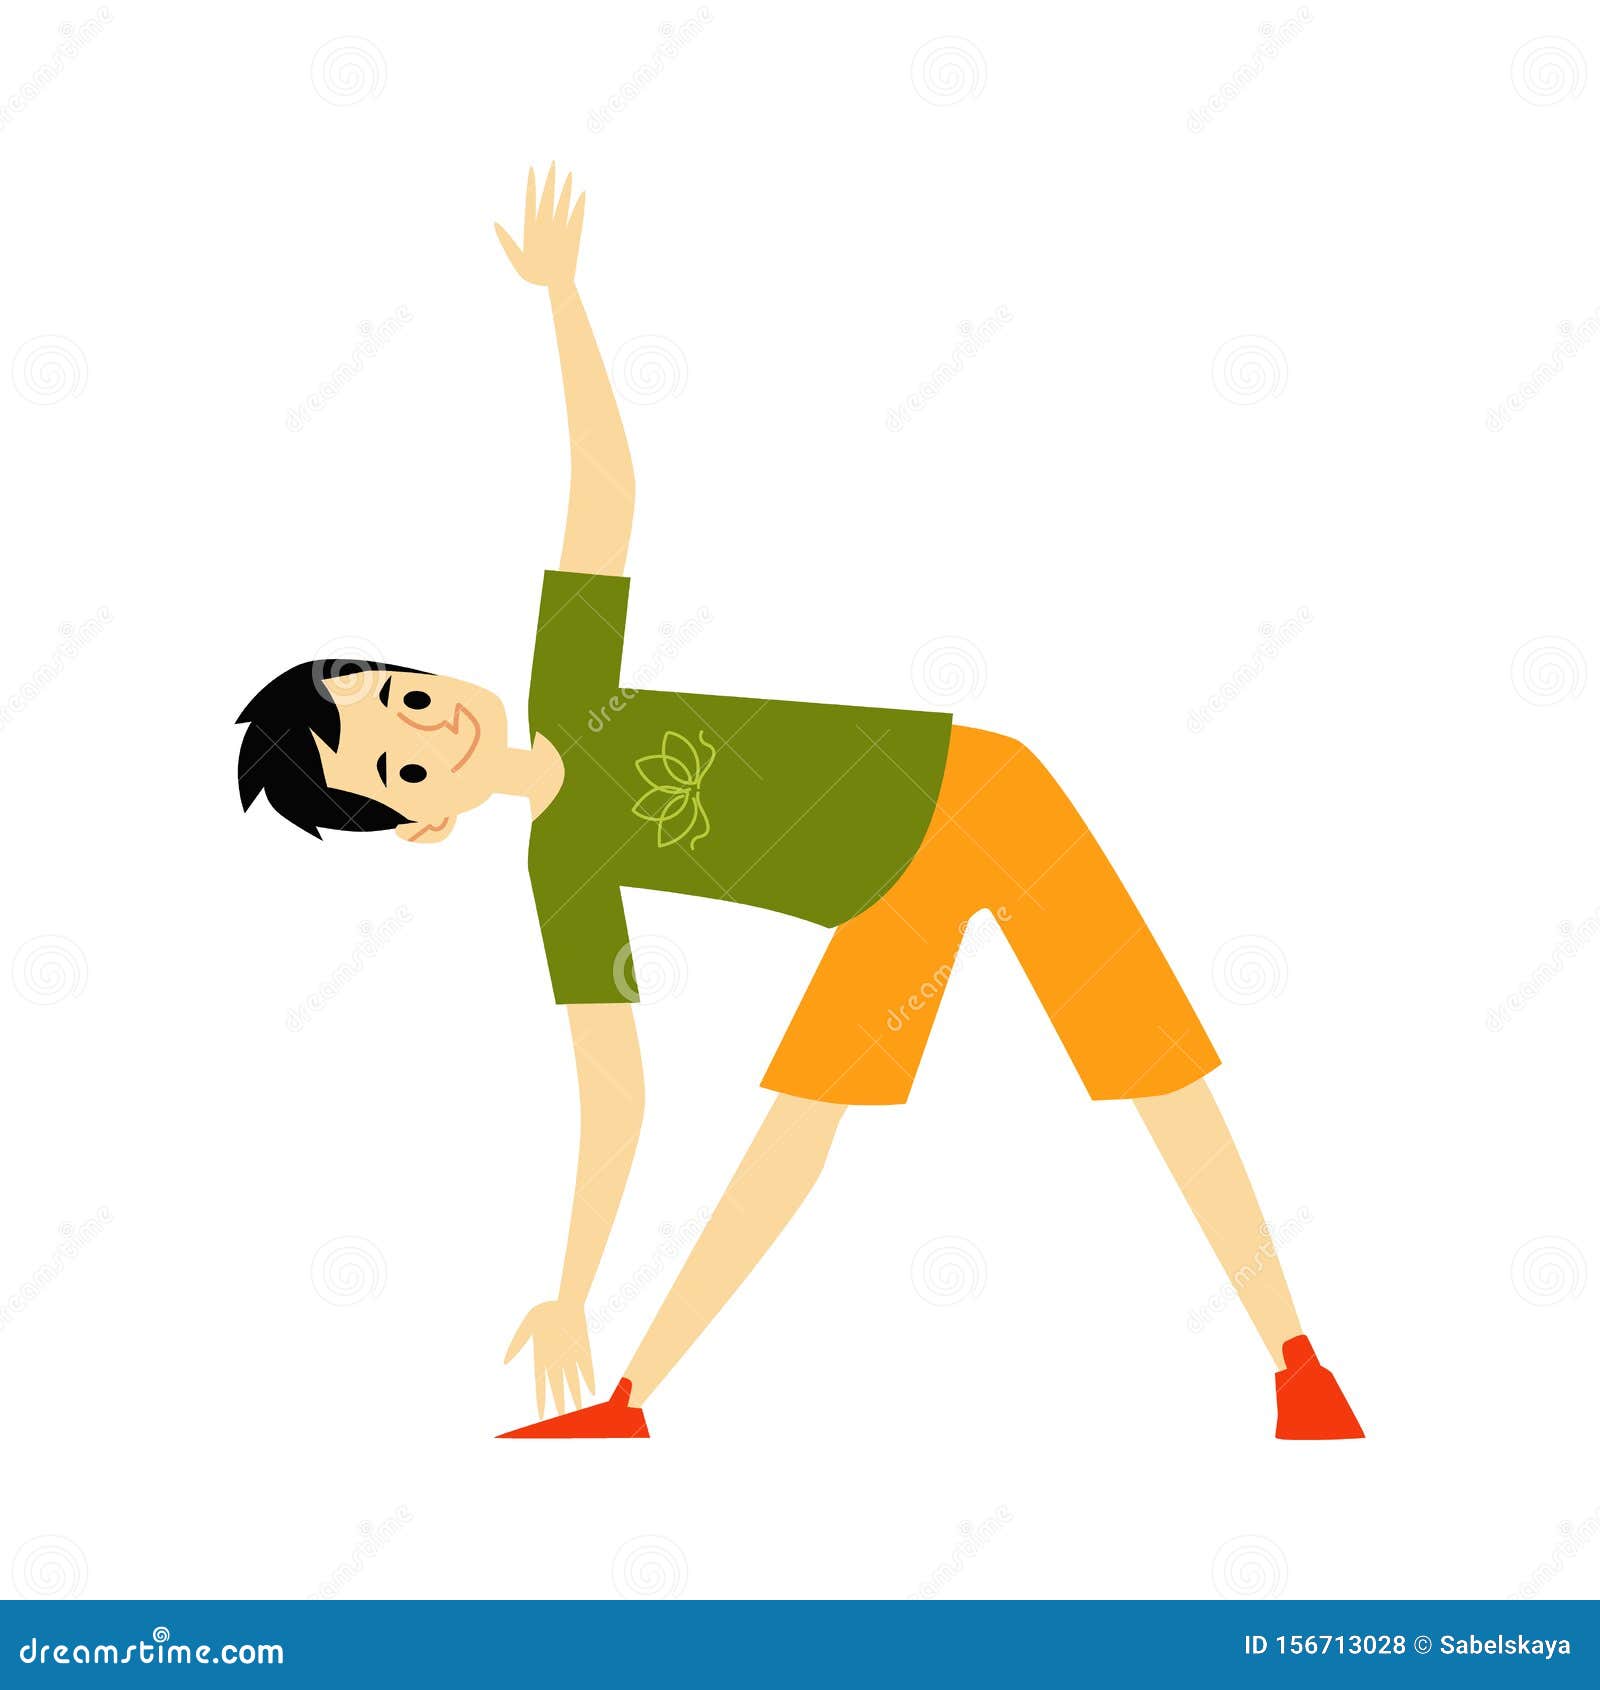 Man Doing Yoga - Cartoon Character Standing in Fitness Exercise Pose for  Stretching and Balance. Stock Vector - Illustration of flat, isolated:  156713028